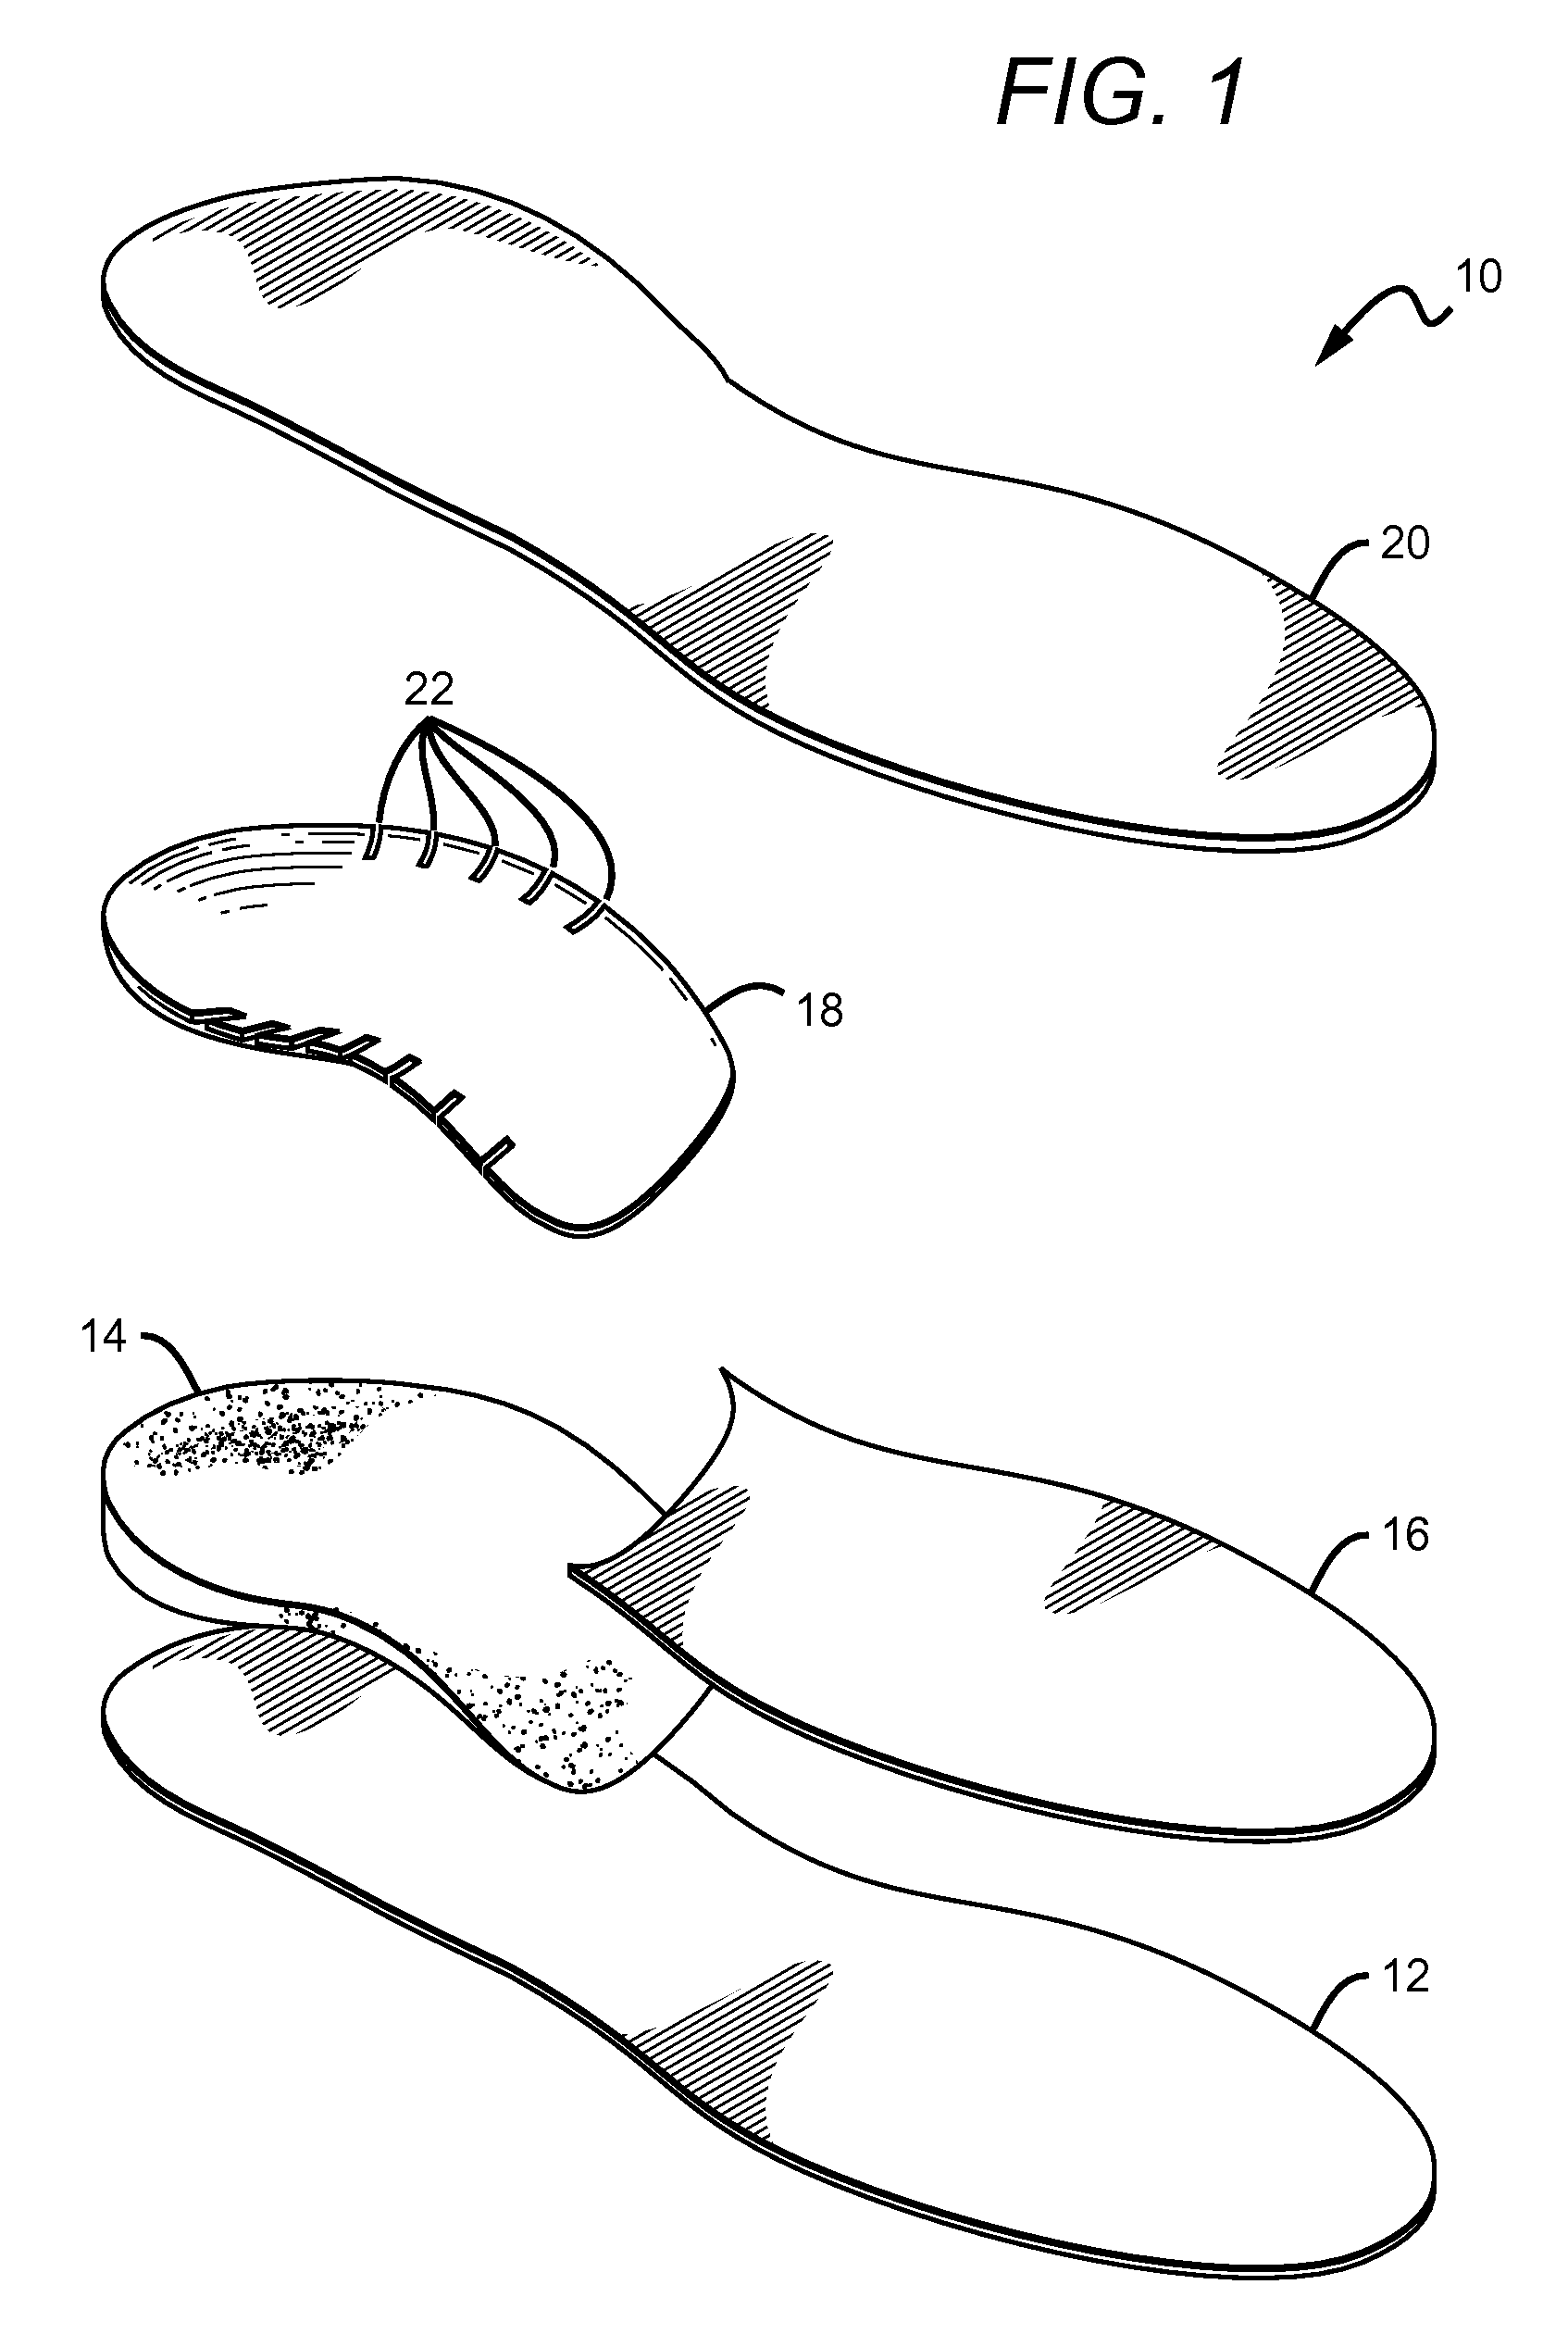 Improved orthotic shell for orthopedic sole insert